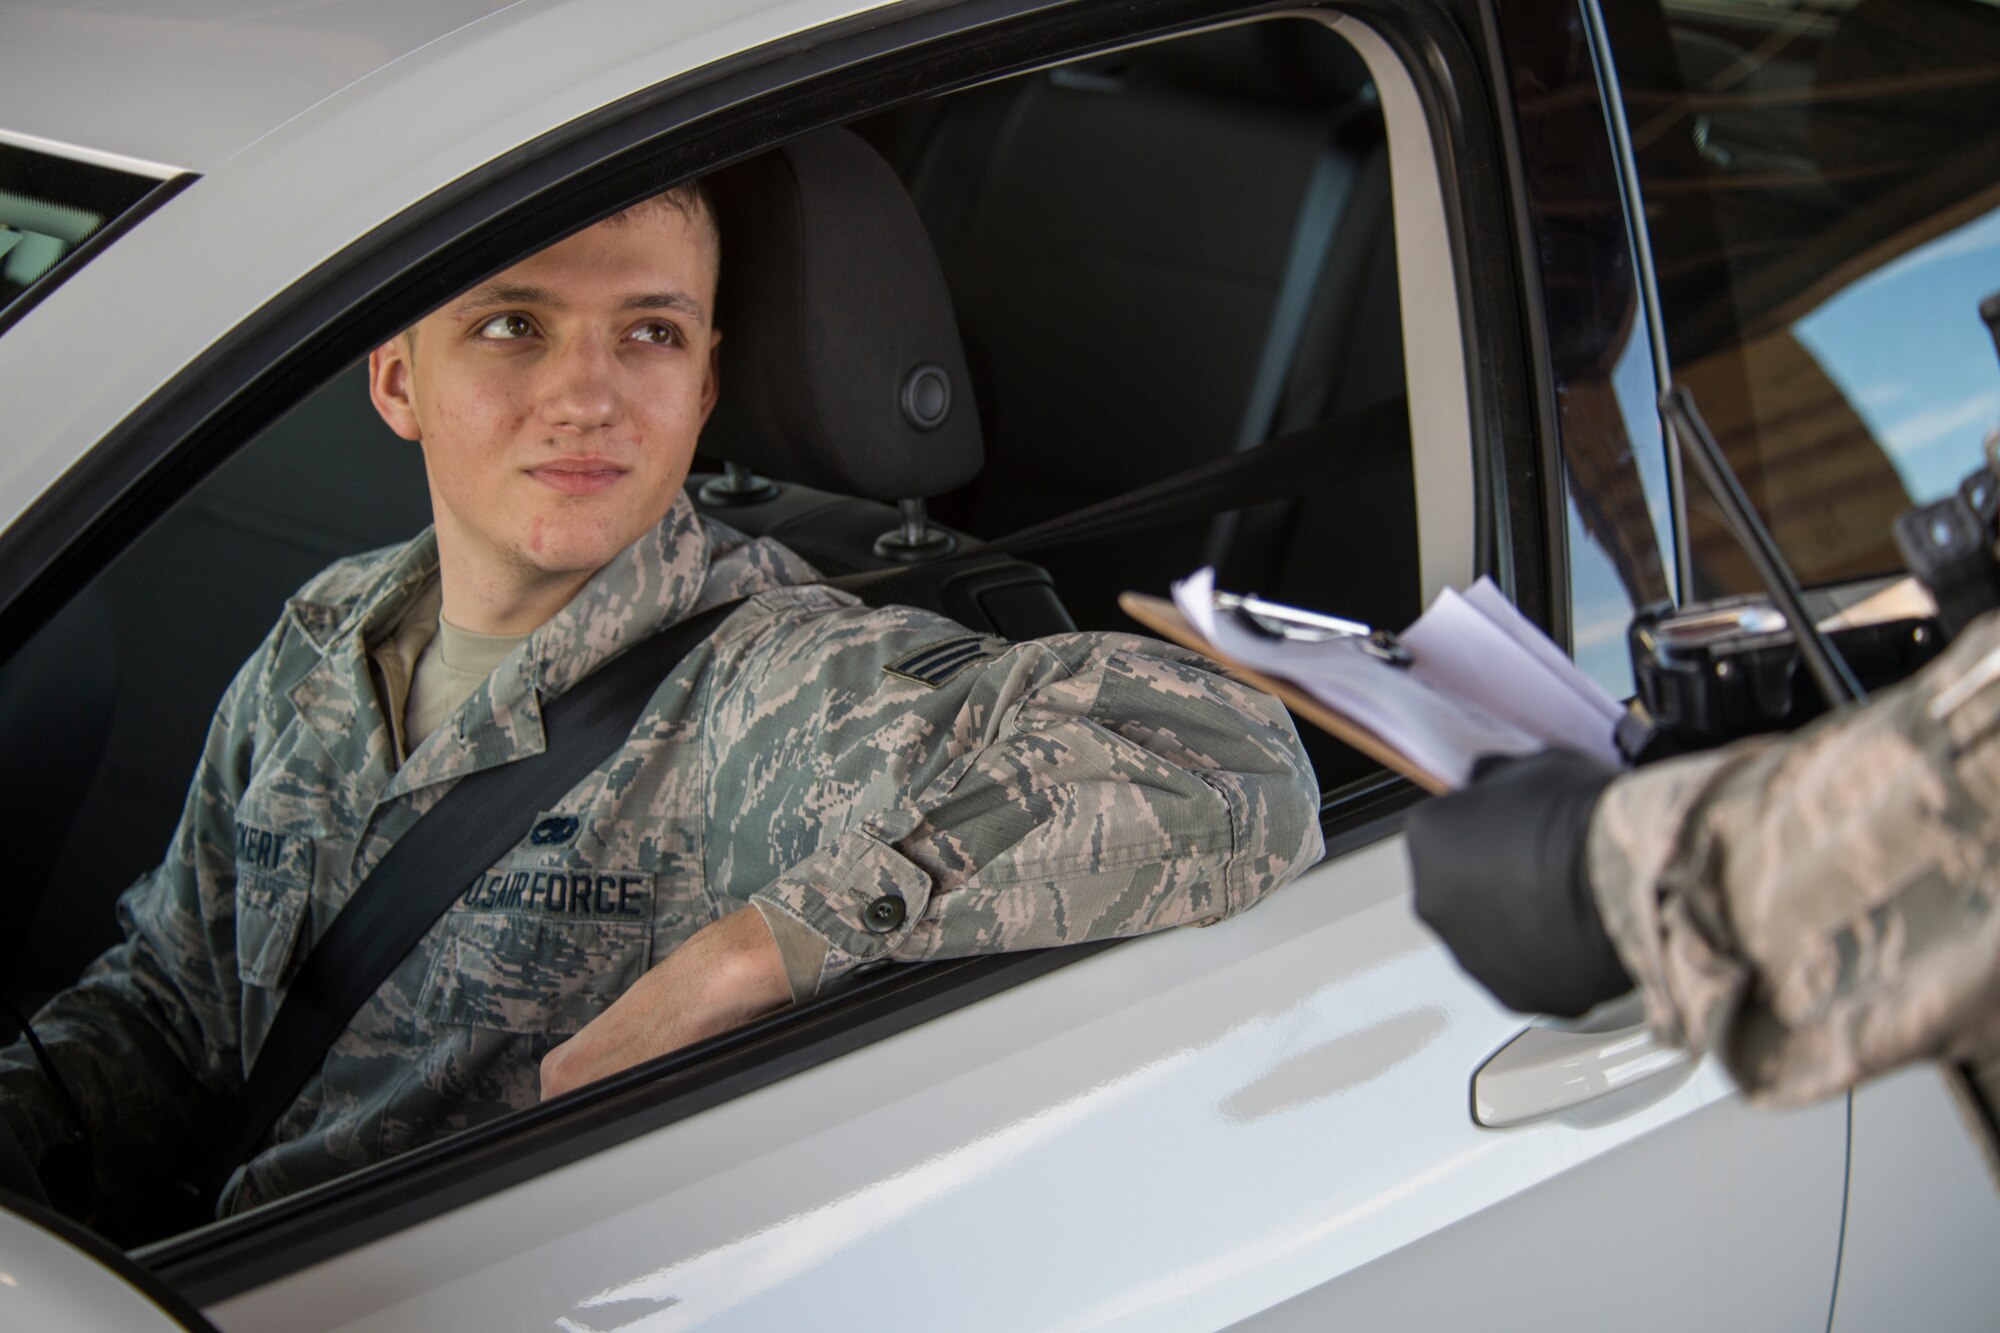 Senior Airman James Pinckert, 49th Component Maintenance Squadron aerospace propulsions journeyman, receives a COVID-19 questionnaire screening at the main gate on Holloman Air Force Base, N.M., March 20, 2020. The questionnaire is designed to identify potential cases of COVID-19 here by discussing possible exposure to the virus through travel or contact with an infected person, among other questions. The questionnaire is part of Holloman’s effort to prevent the spread of COVID-19. (U.S. Air Force photo by Senior Airman Collette Brooks)